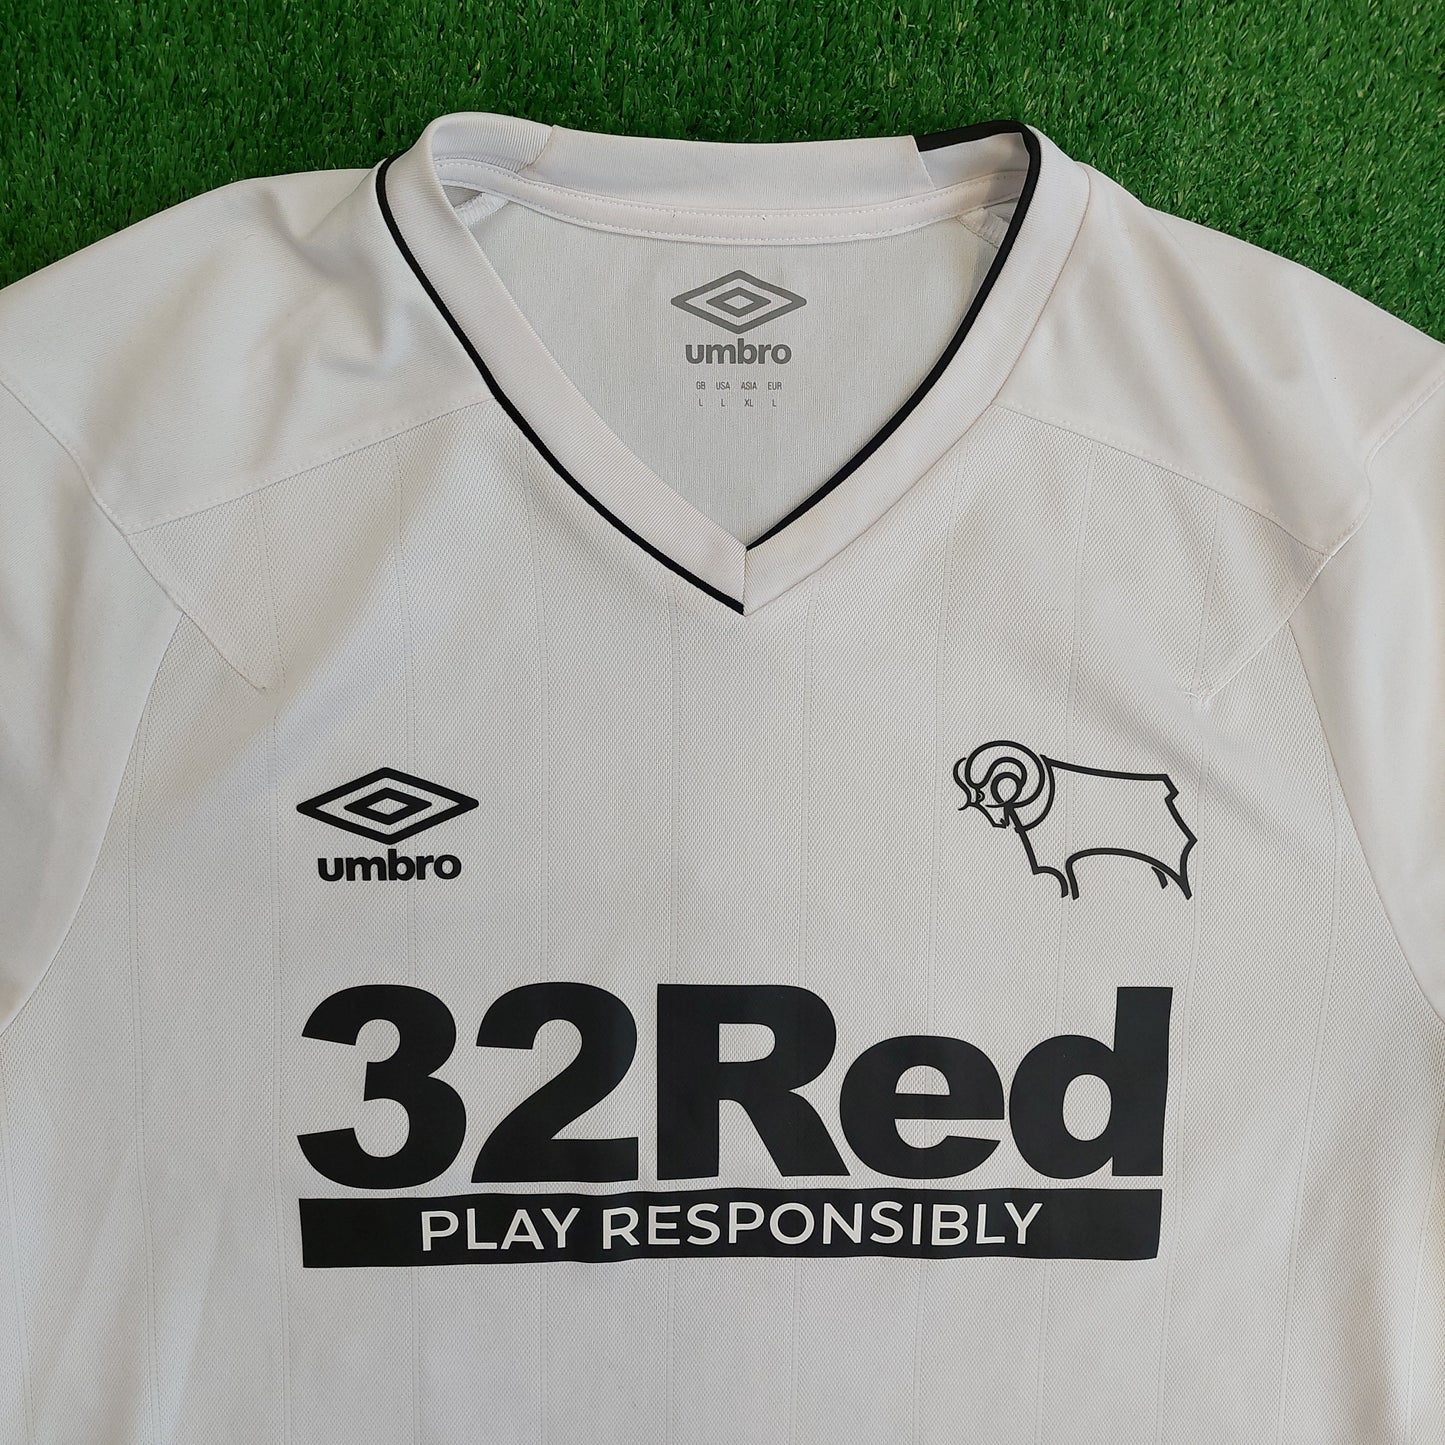 Derby County 2020/21 Home Shirt (Excellent) - Size L